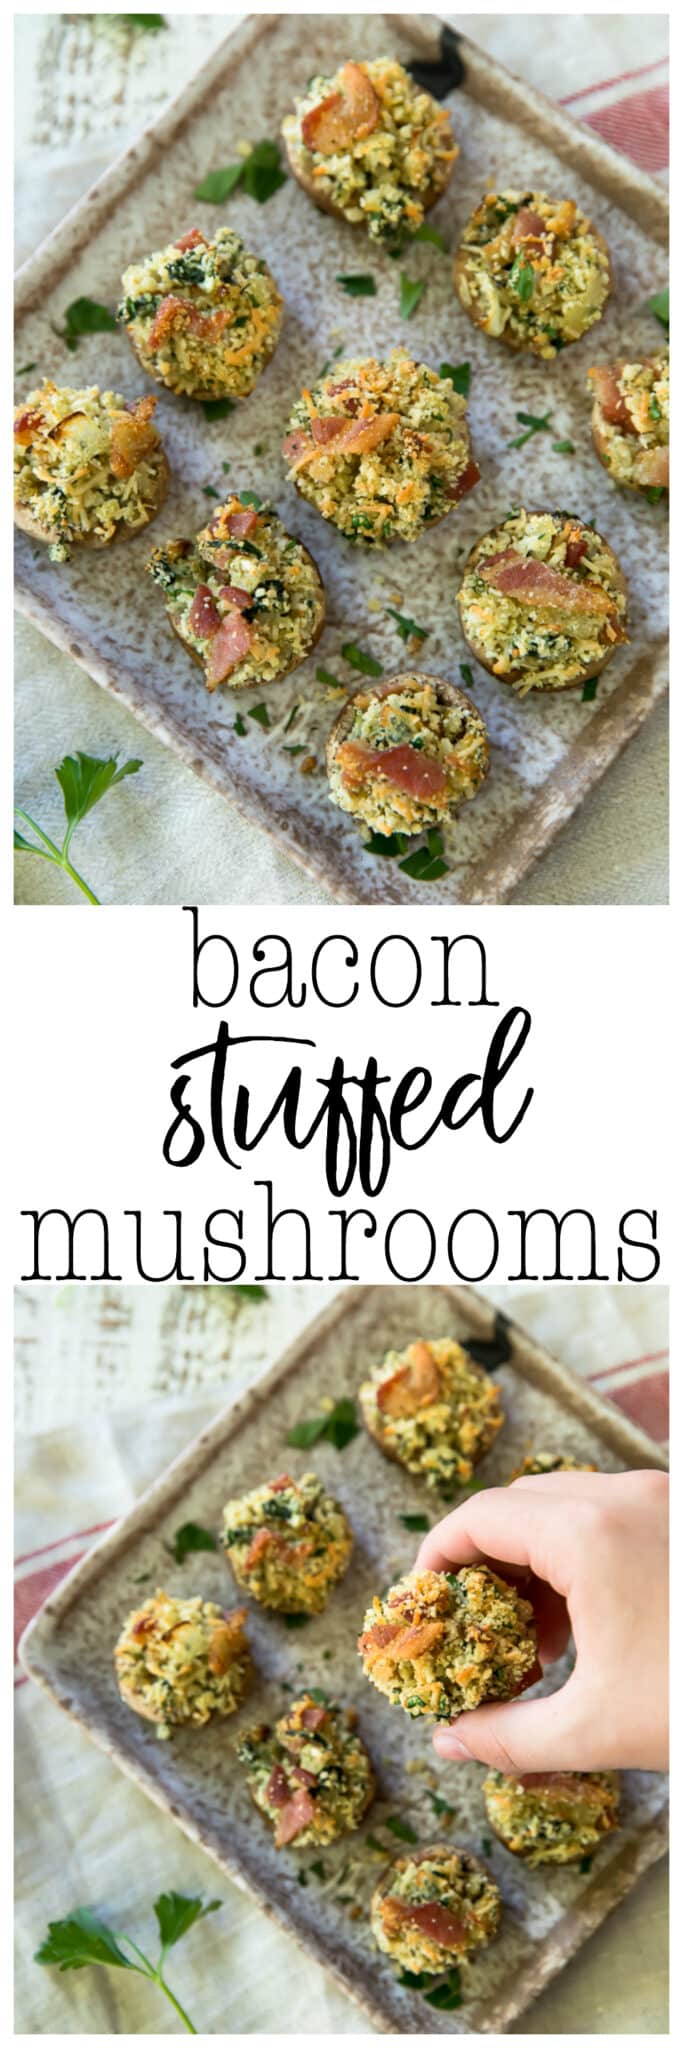 These Bacon Stuffed Mushrooms are the perfect app for your next party! Who doesn't love this cheesy and bacon filled deliciousness in the bite-sized perfection of mushroom caps?!